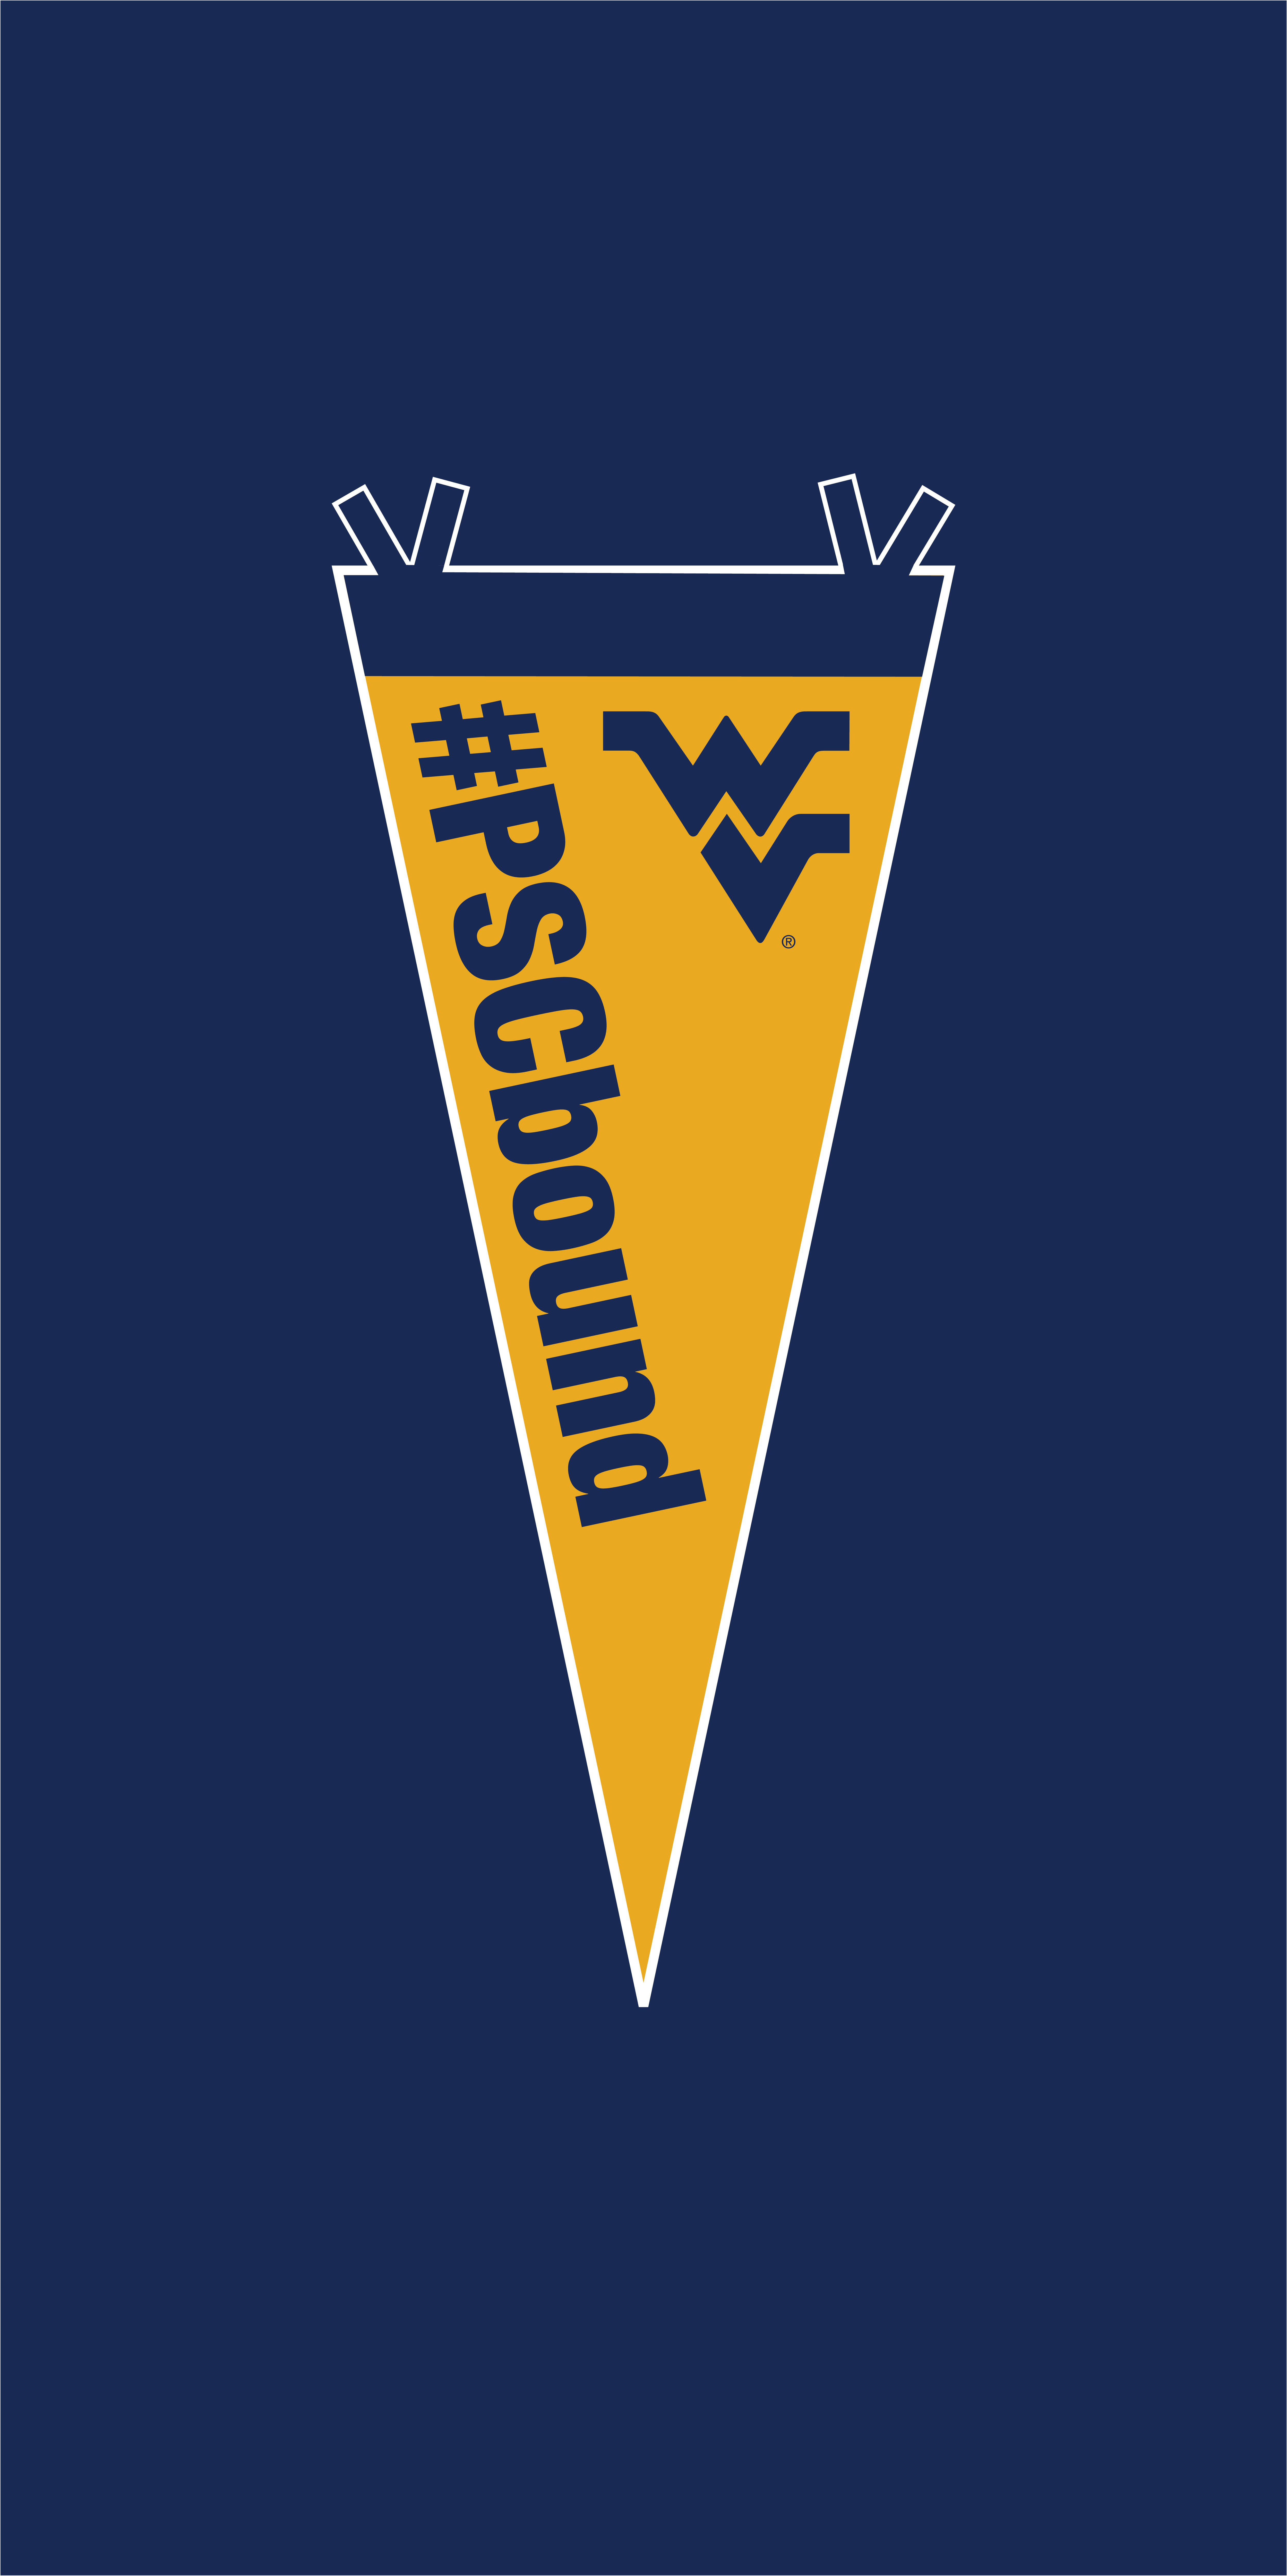 West Virginia University  Need a new wallpaper for your desktop Heres  one from WVUs first Big 12 Conference game on Sept 29 Download here  httpwwwwvusportscomwallpapercfm  Facebook